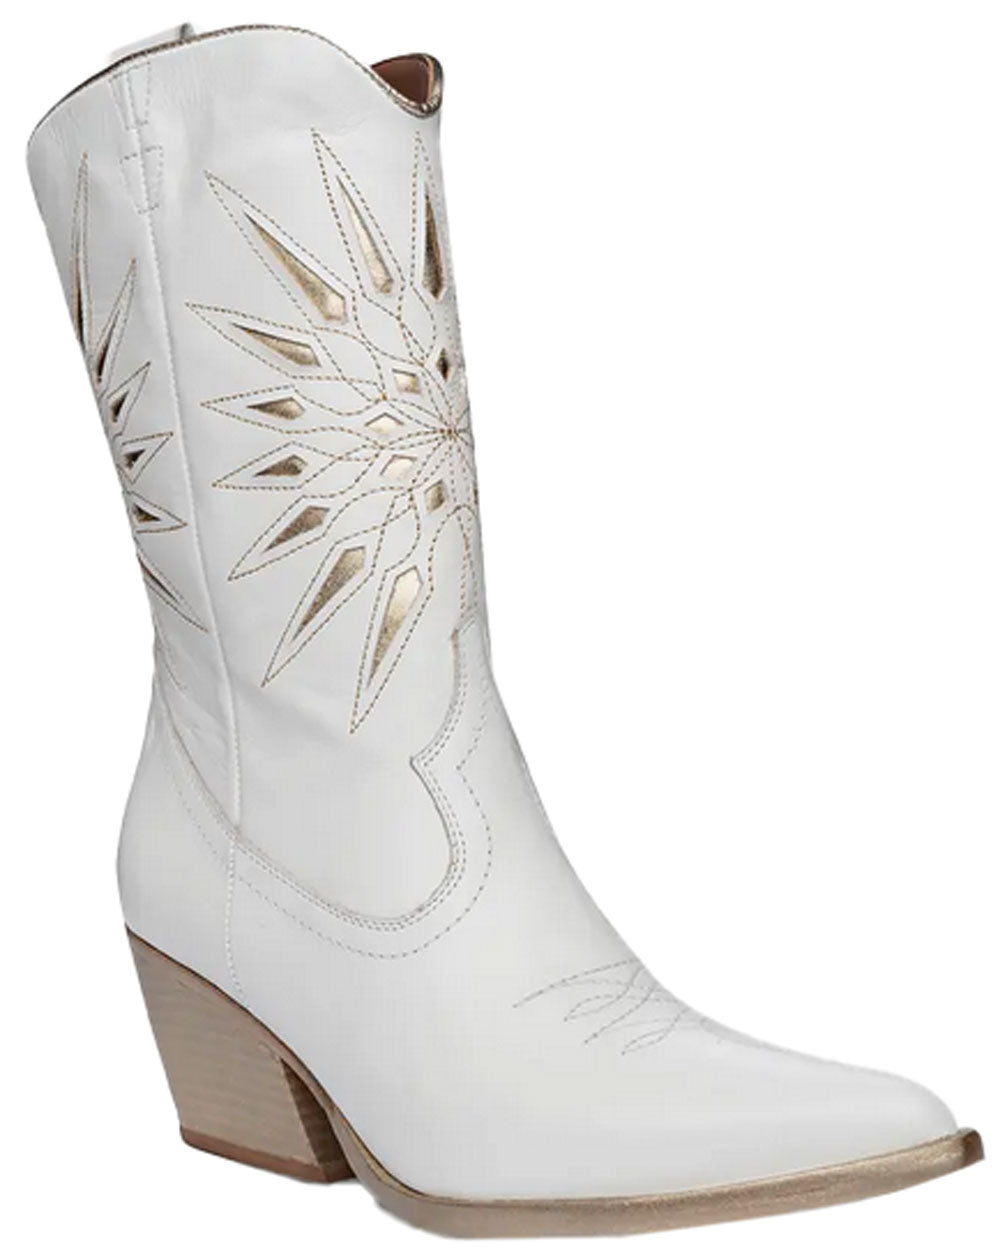 Mae Cowboy Boot in White and Gold